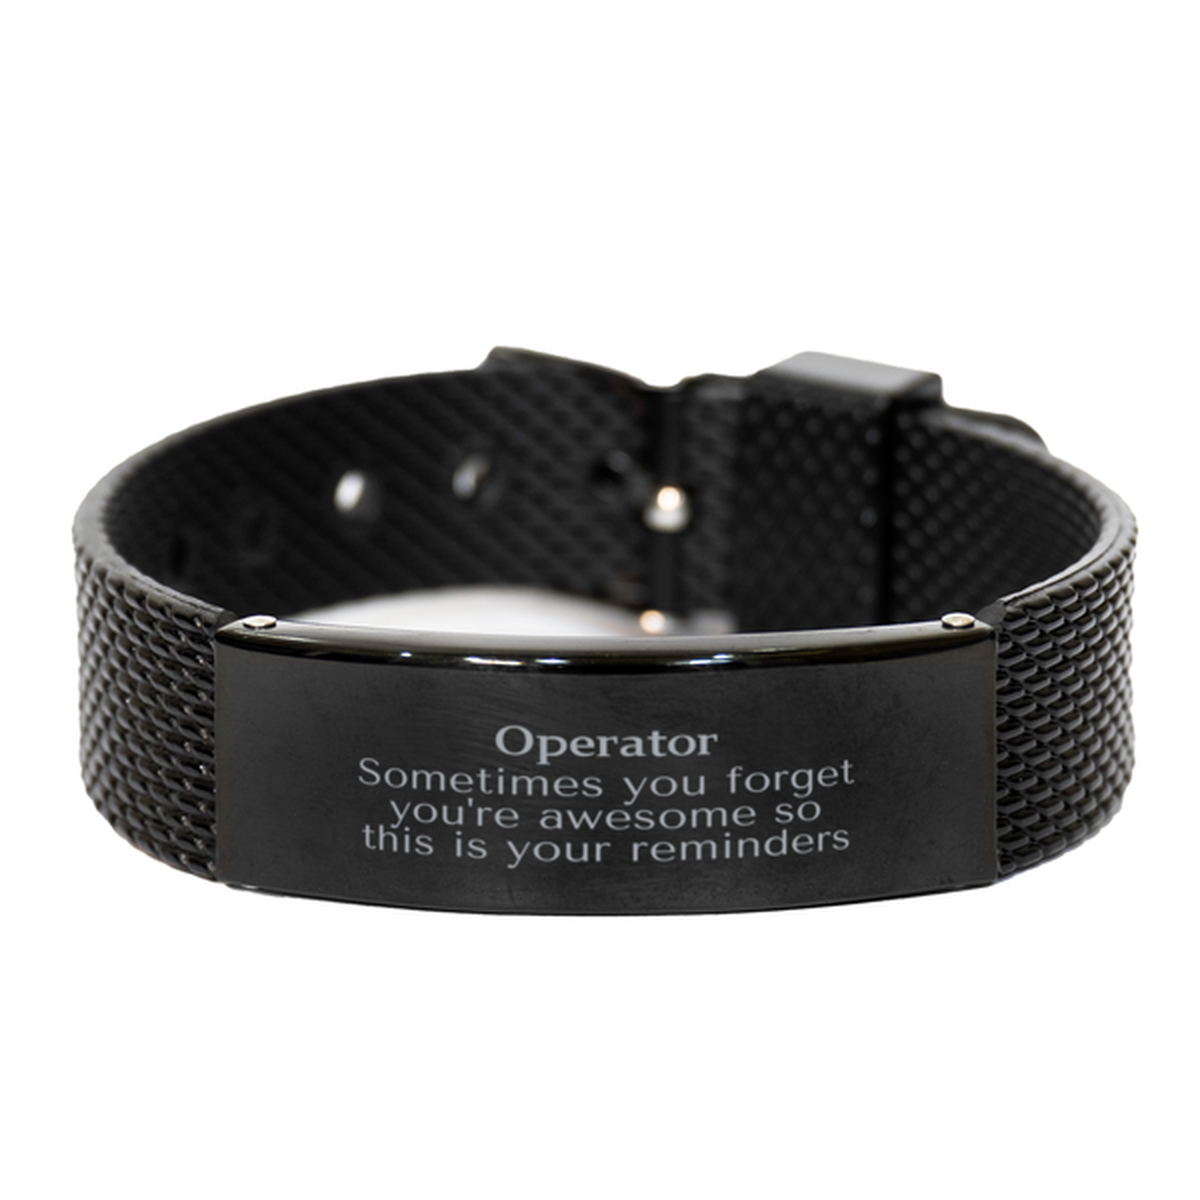 Sentimental Operator Black Shark Mesh Bracelet, Operator Sometimes you forget you're awesome so this is your reminders, Graduation Christmas Birthday Gifts for Operator, Men, Women, Coworkers